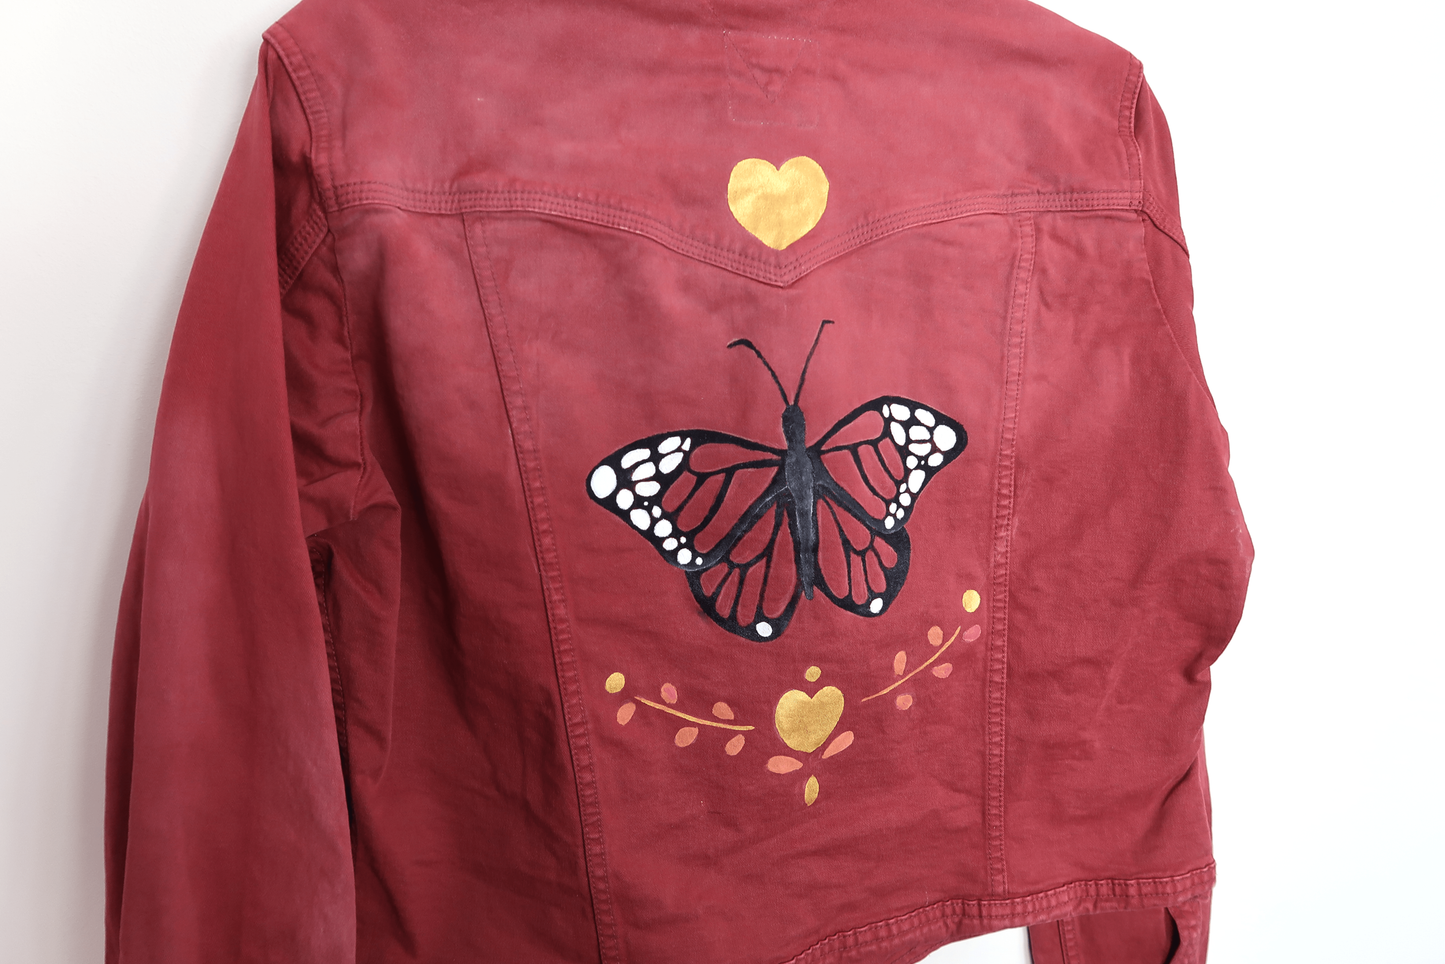 Butterfly Rusty-Red Cropped Denim Jacket - Hand Painted - UK Size 18